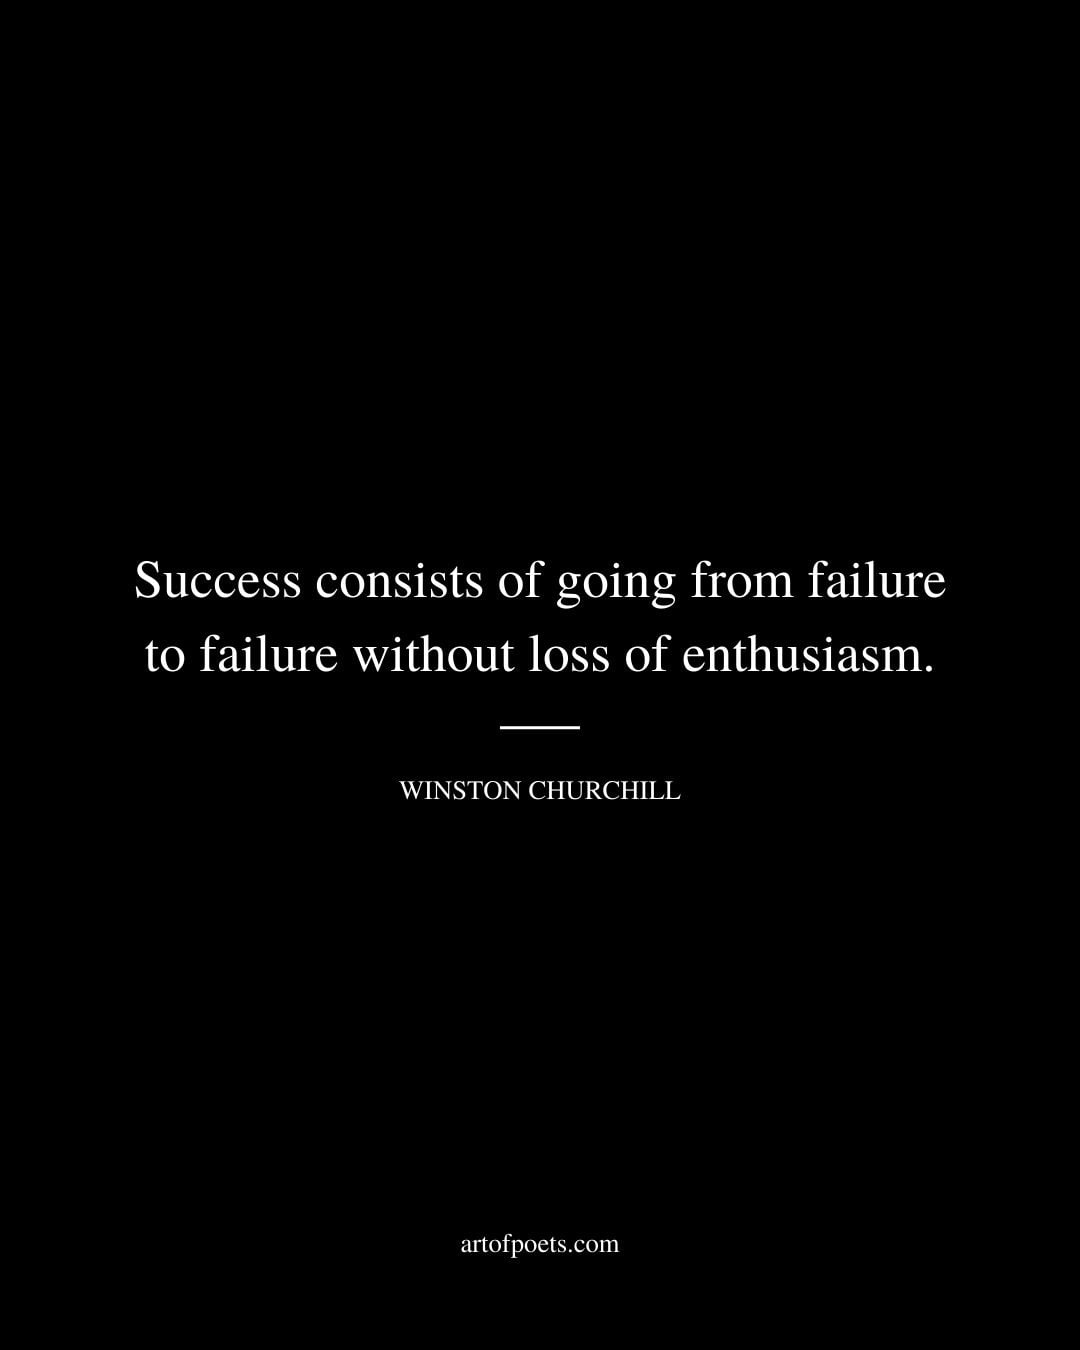 Success consists of going from failure to failure without loss of enthusiasm. Winston Churchill